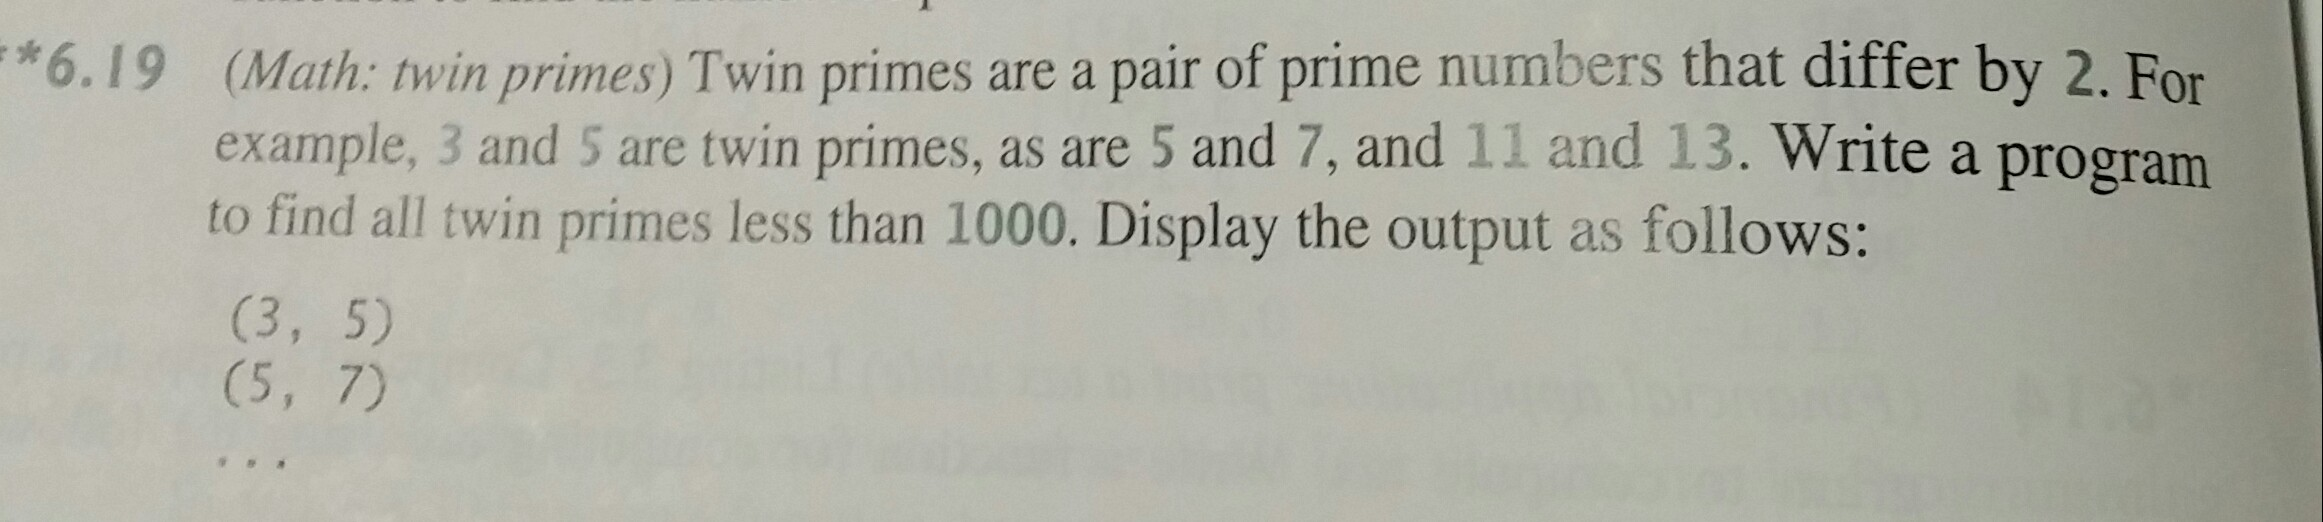 math-twin-primes-twin-pair-of-prime-numbers-that-chegg